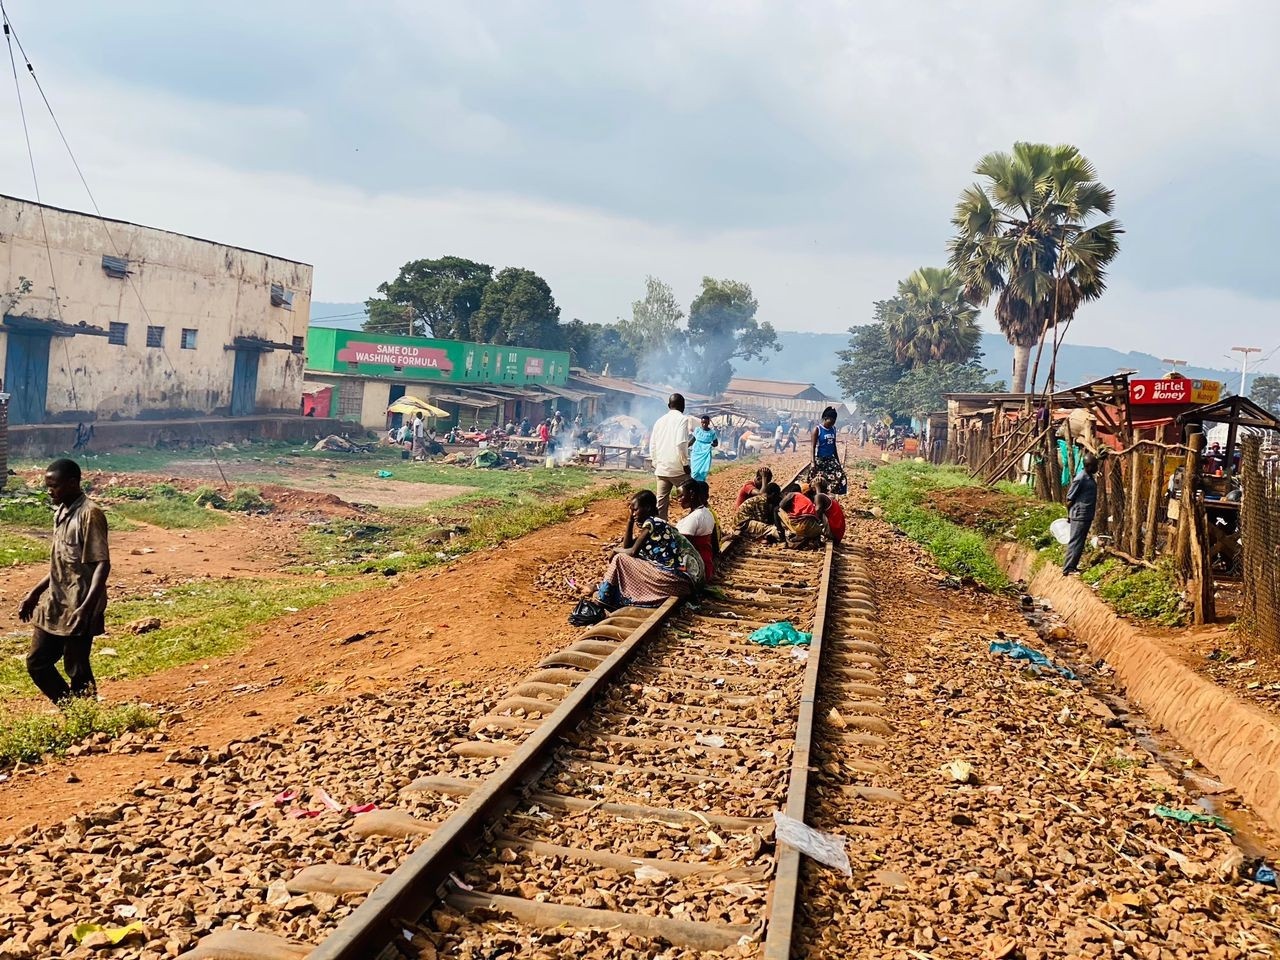 Street connected children sitting on a railway track in Uganda in a suburban scene. There is rubbish on the floor.